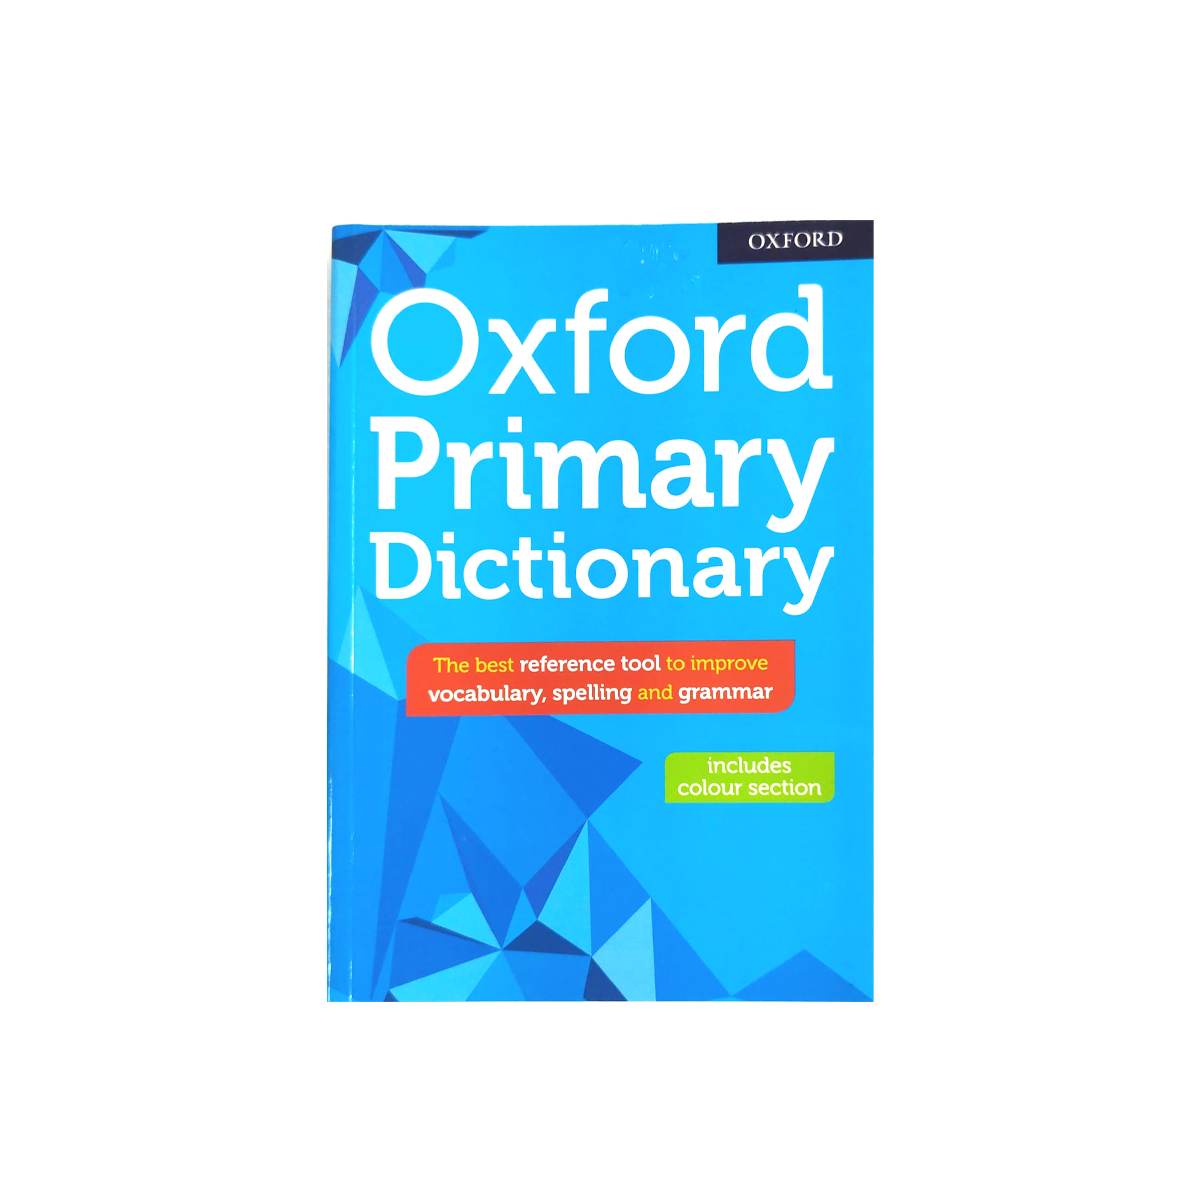 Oxford - Primary Dictionary - Charran's Chaguanas